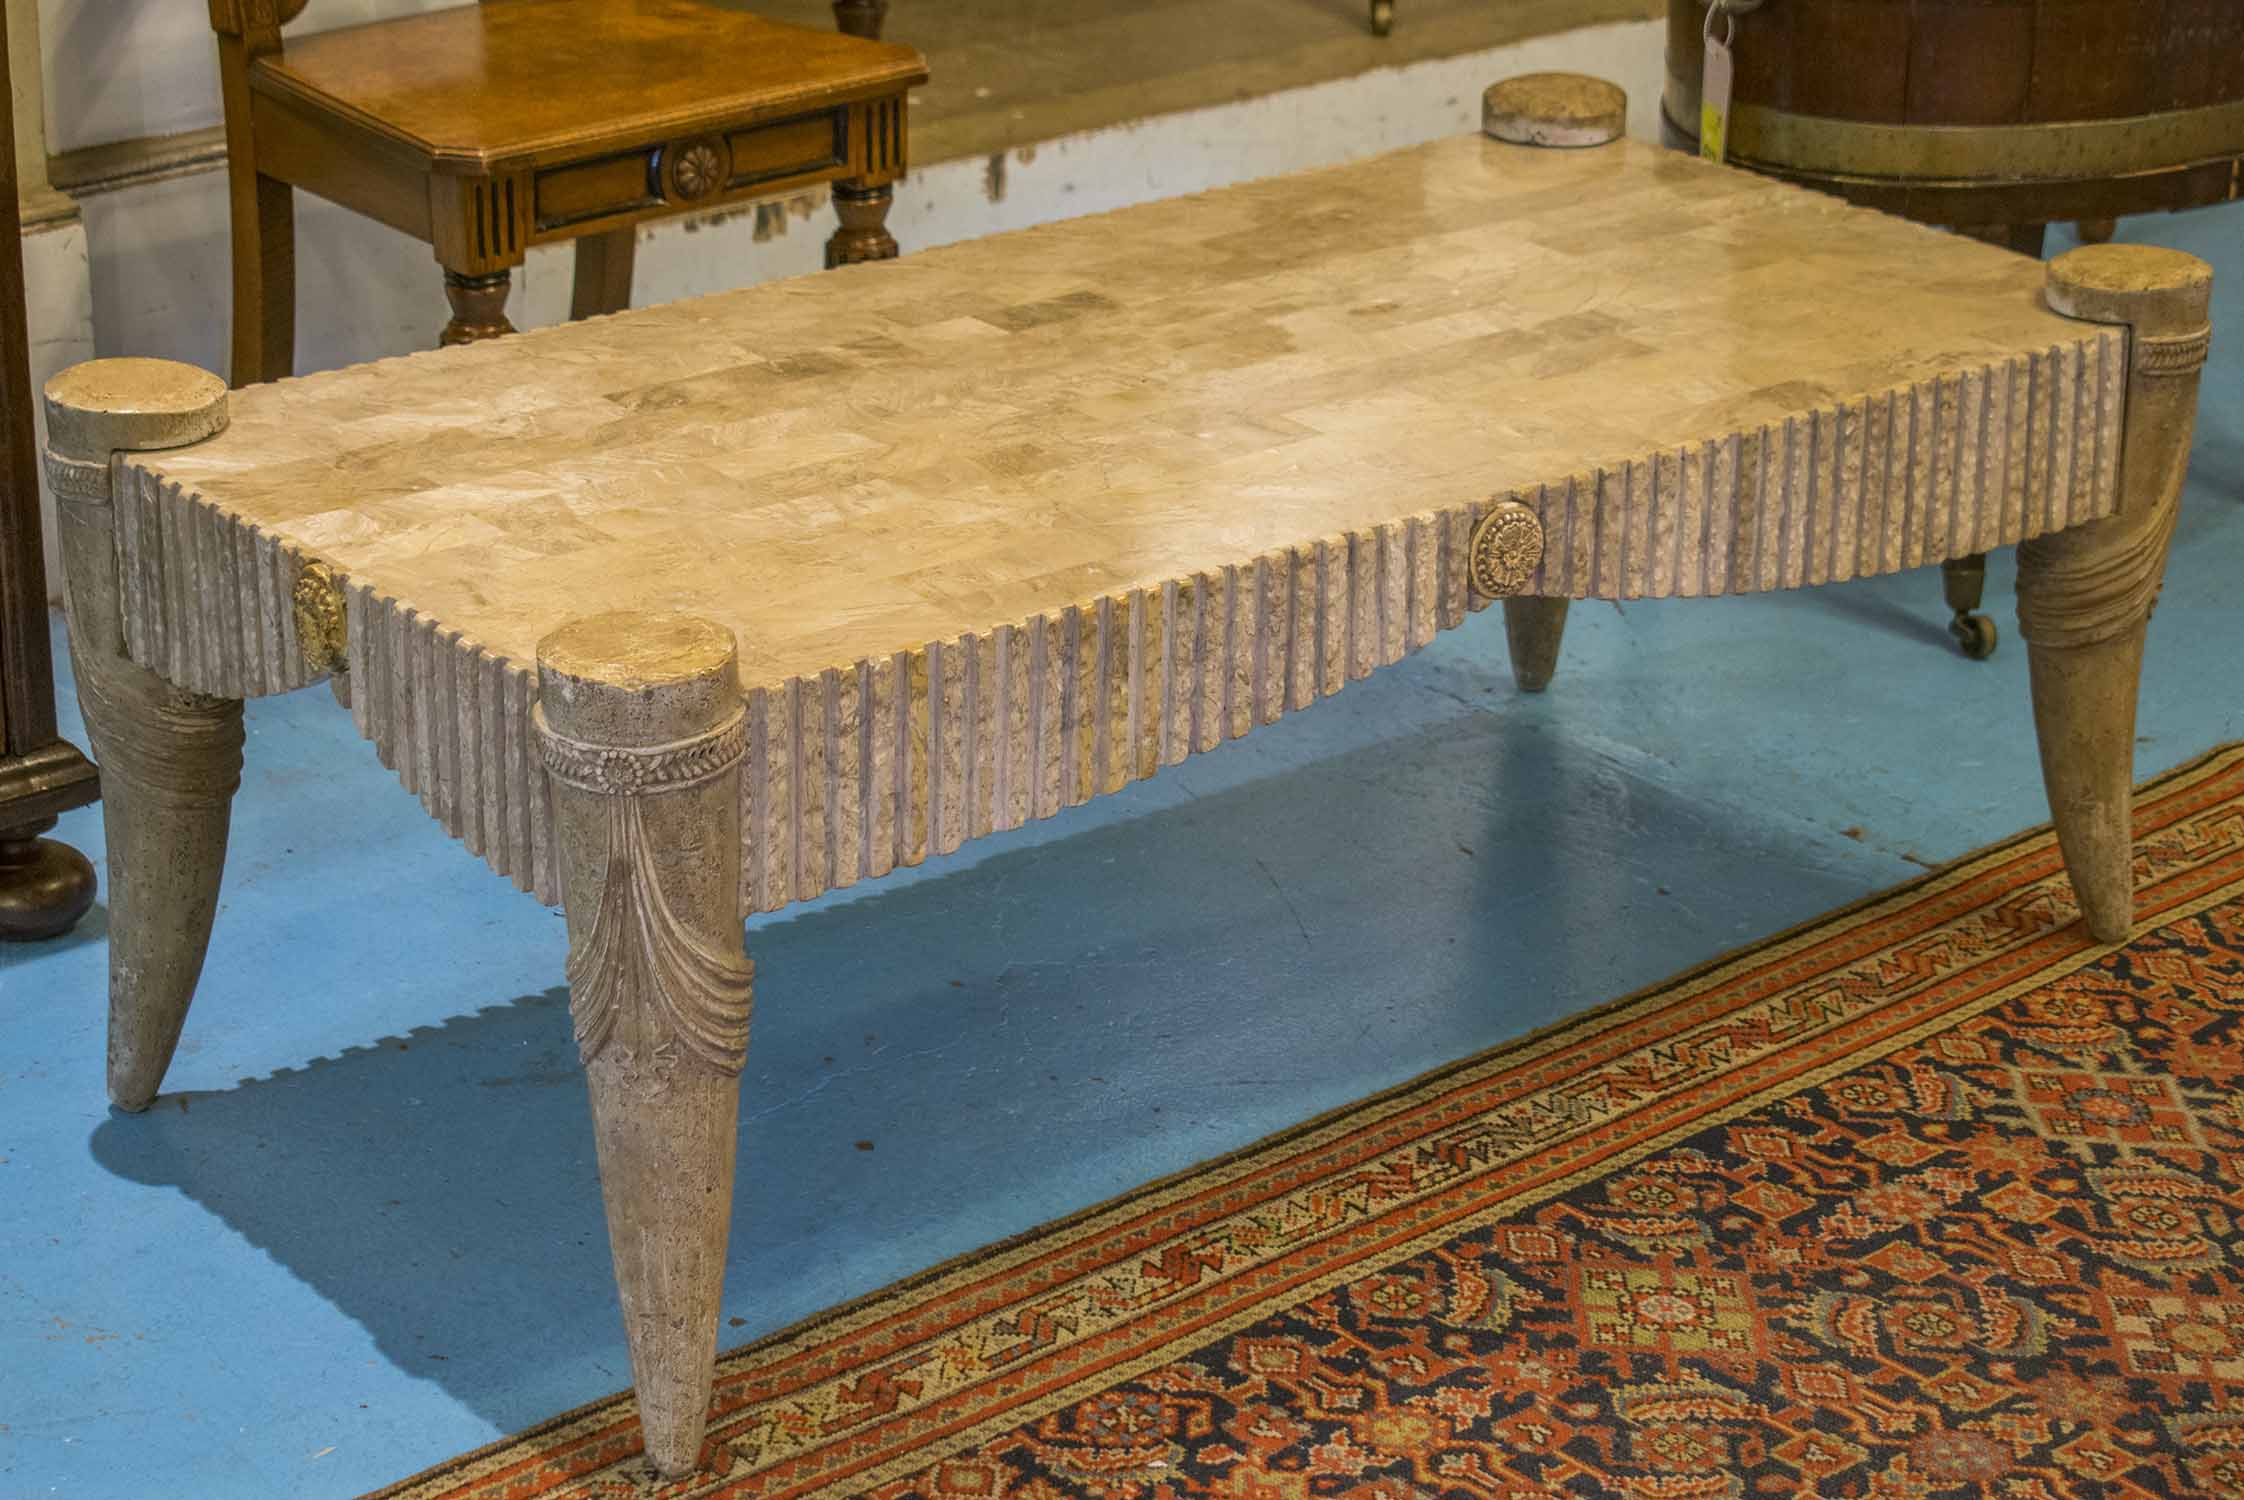 LOW TABLE, Classical form polished travertine marble,